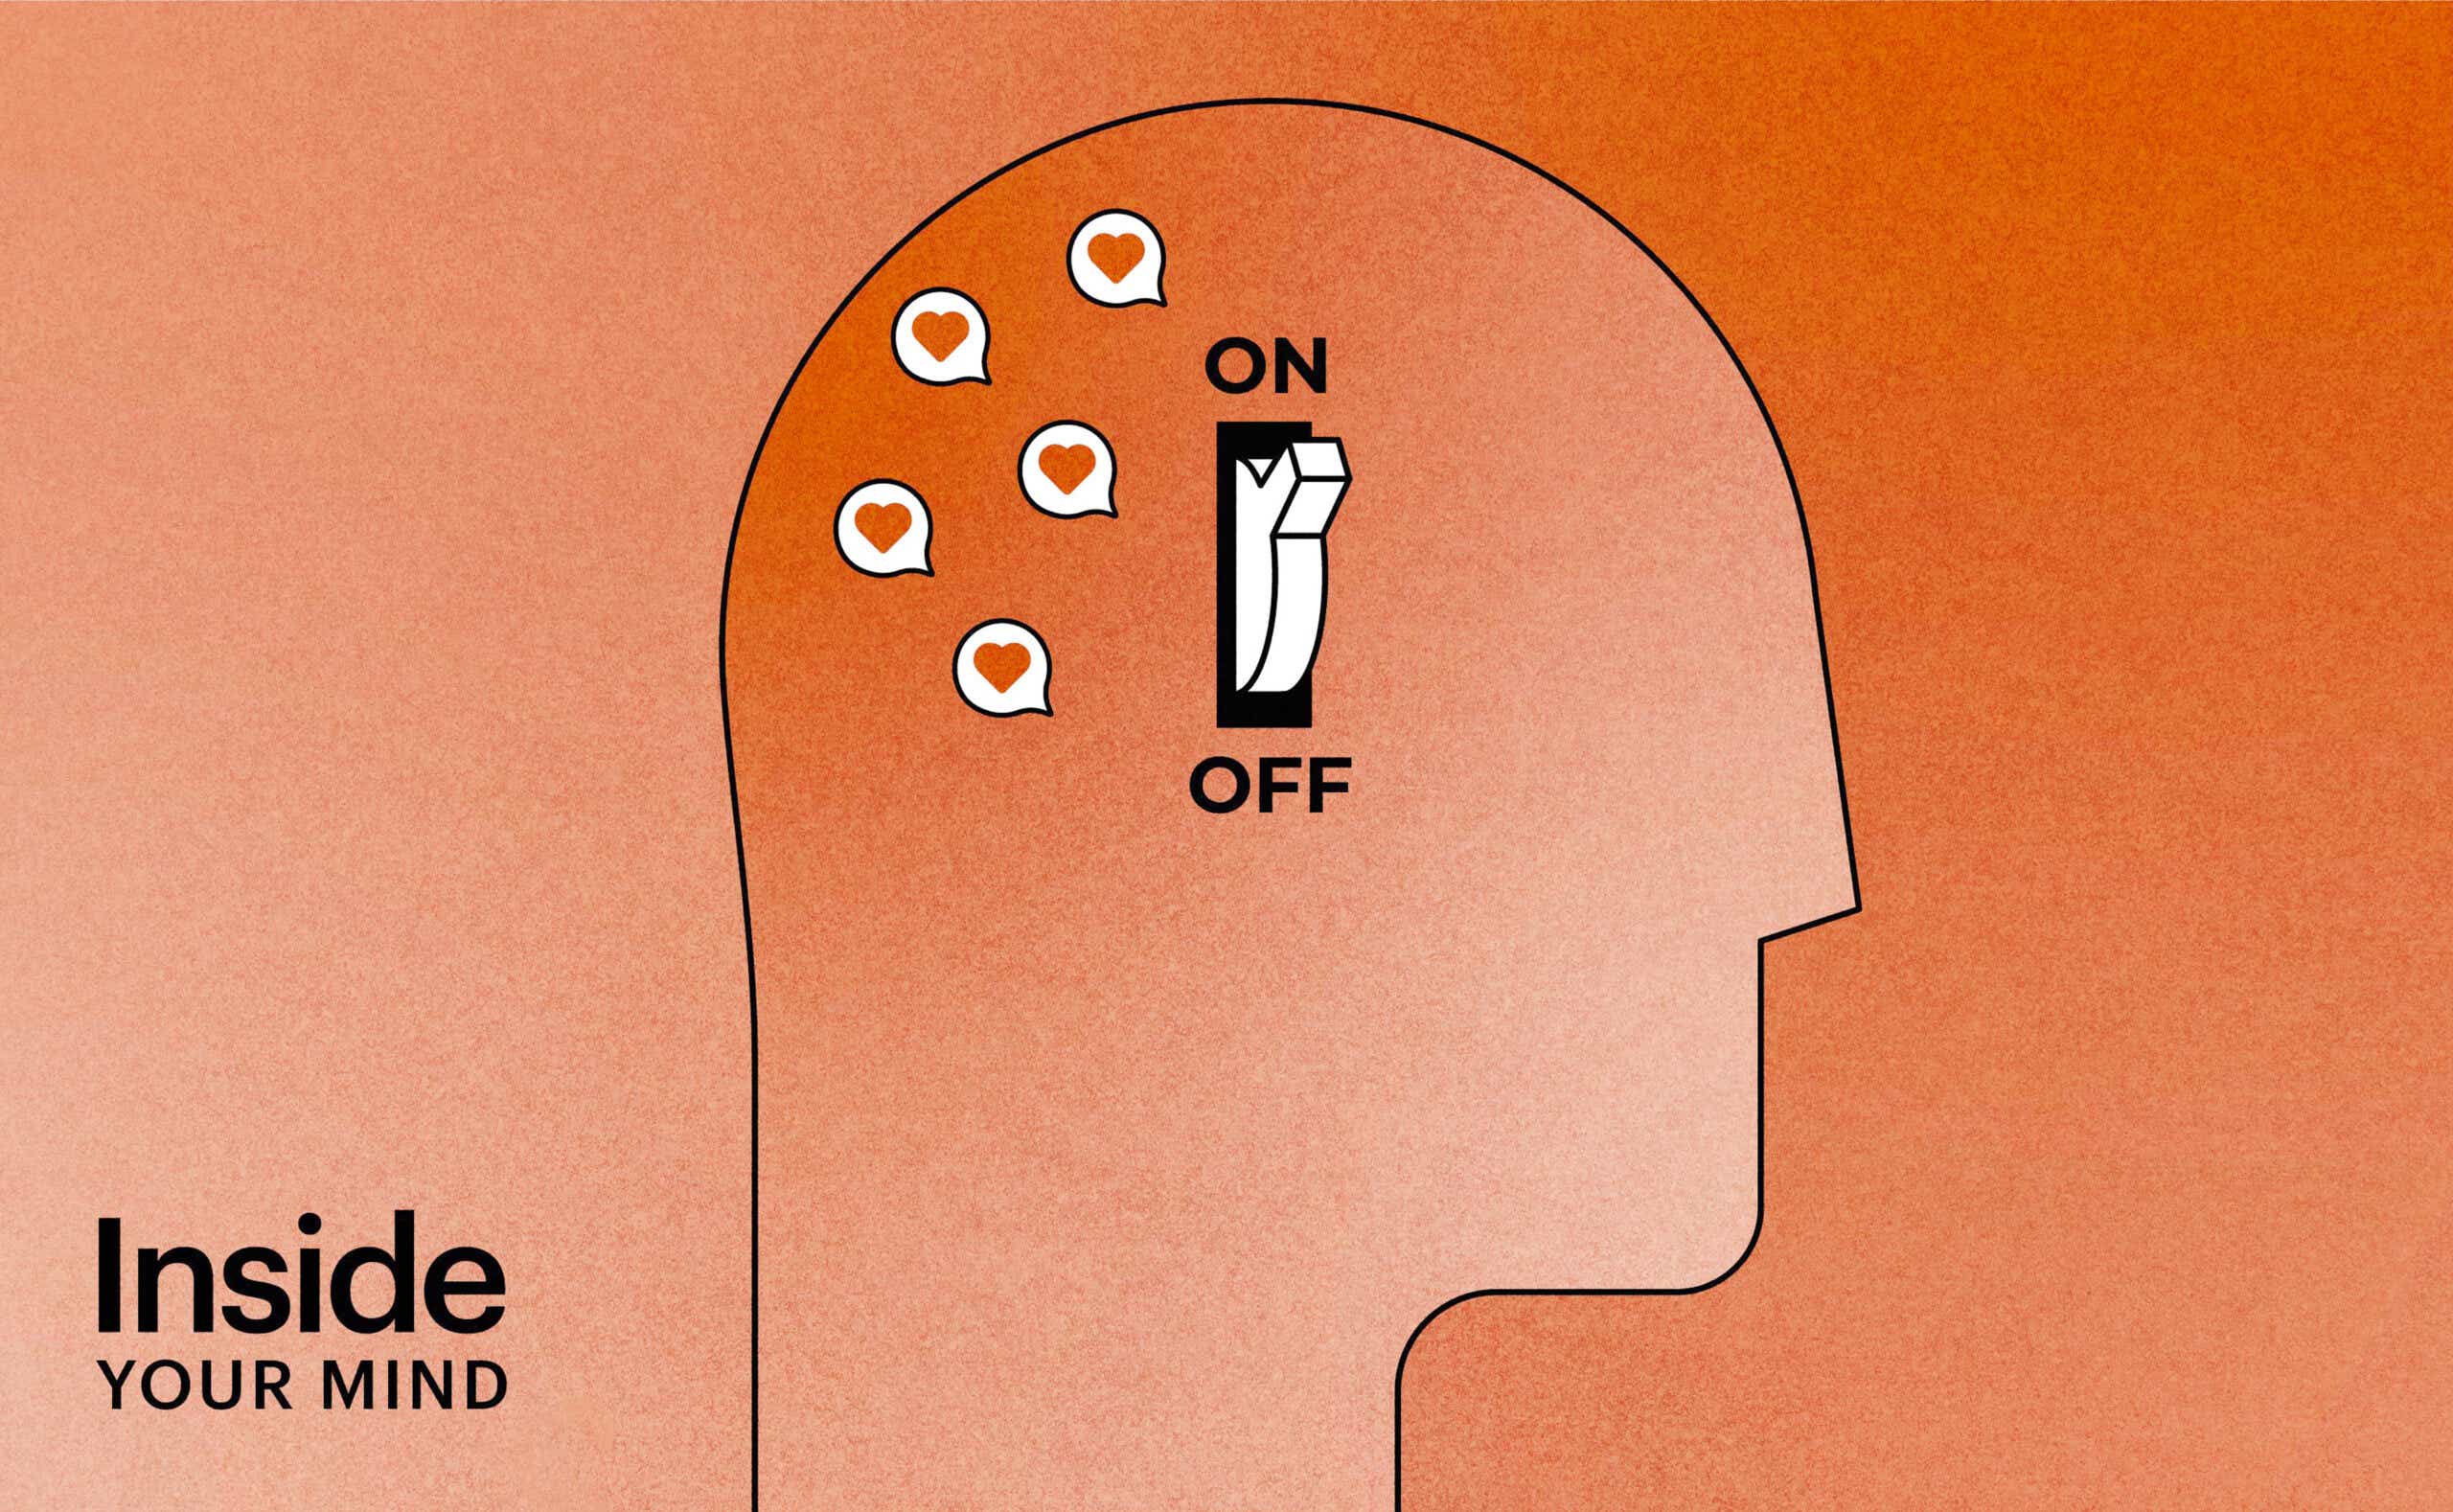 Illustration of a head with a light switch on it that's turned to "on" and heart emojis indicating love